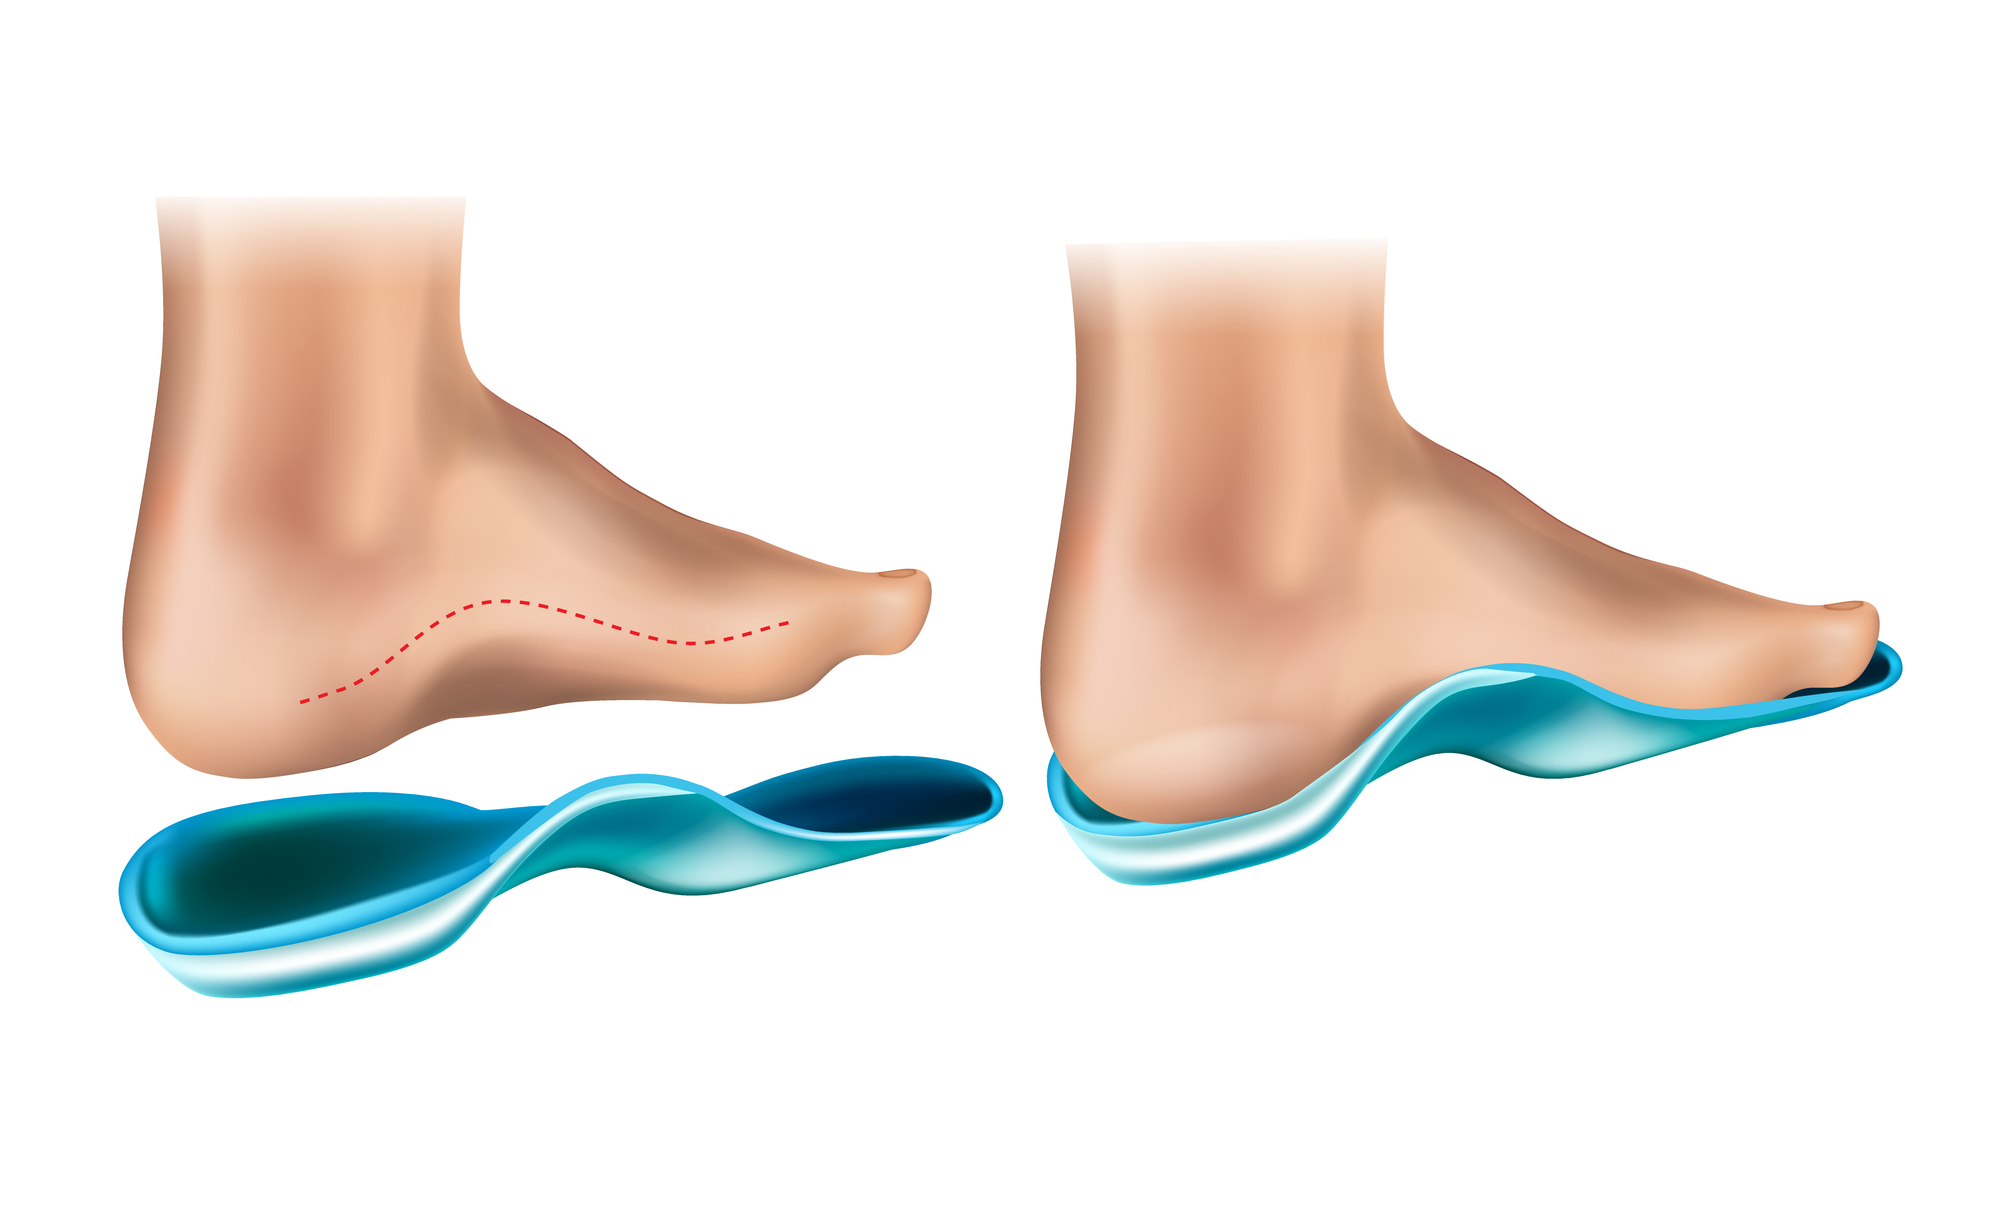 The Different Types of Foot Orthotics